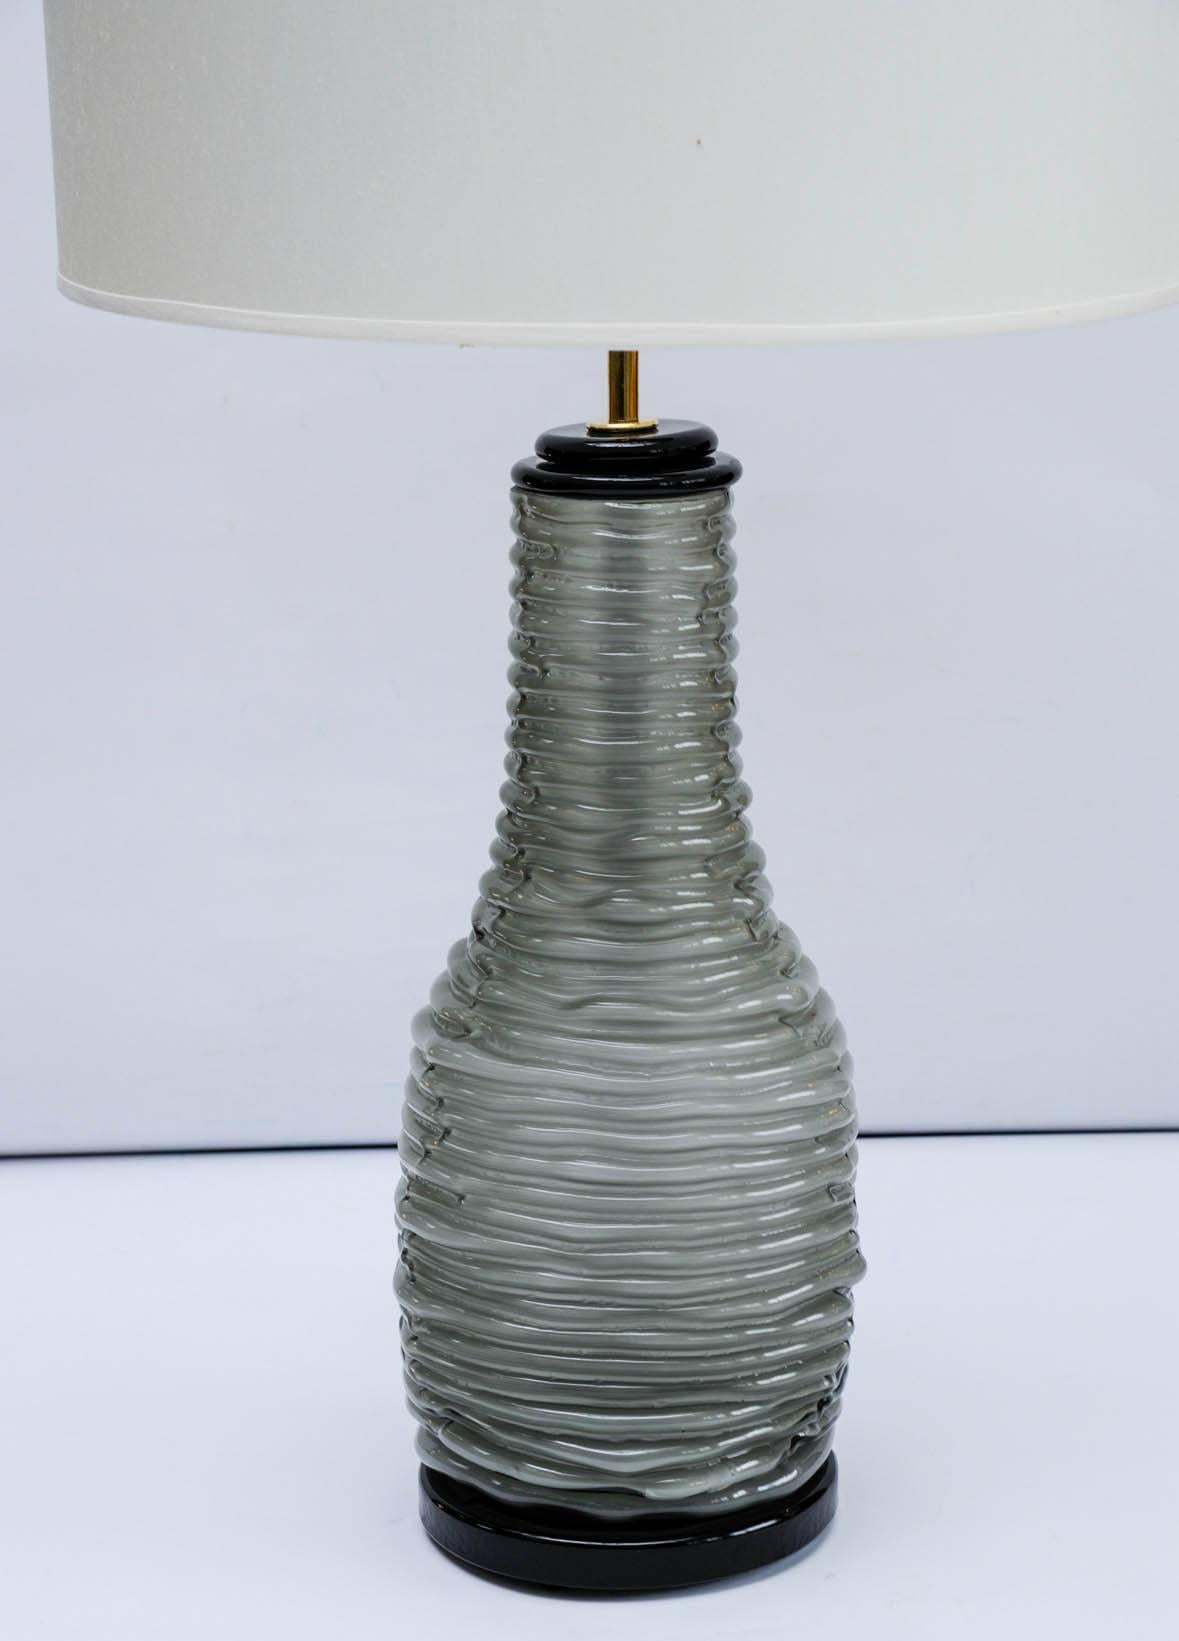 Pair of beautiful and refine table lamps made of grey and black Murano glass and brass setting.

They grey body has a special texture giving the optical illusion of a rope being stacked on itself to shape the lamp.